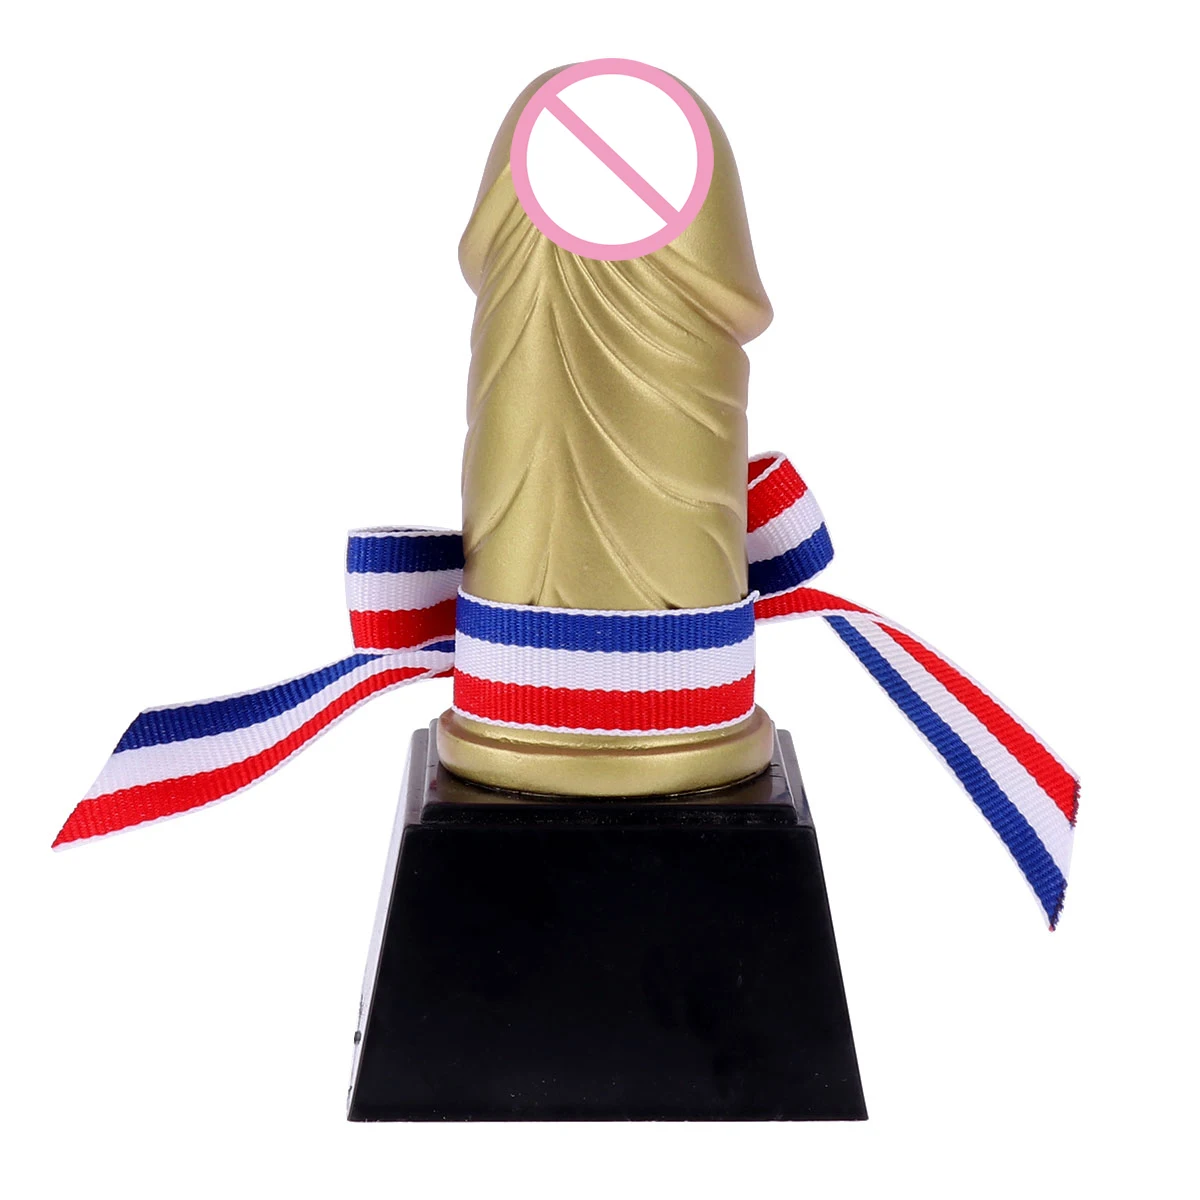 Chest/Penis Trophy,Novelty Trophy Funny Trophy for Adults,Spoof Trophy Gag Trophy Bachelorette Party Supplies Hen Night Bridal Shower Party Gift Valentine's Day Present Style-1, One Size 